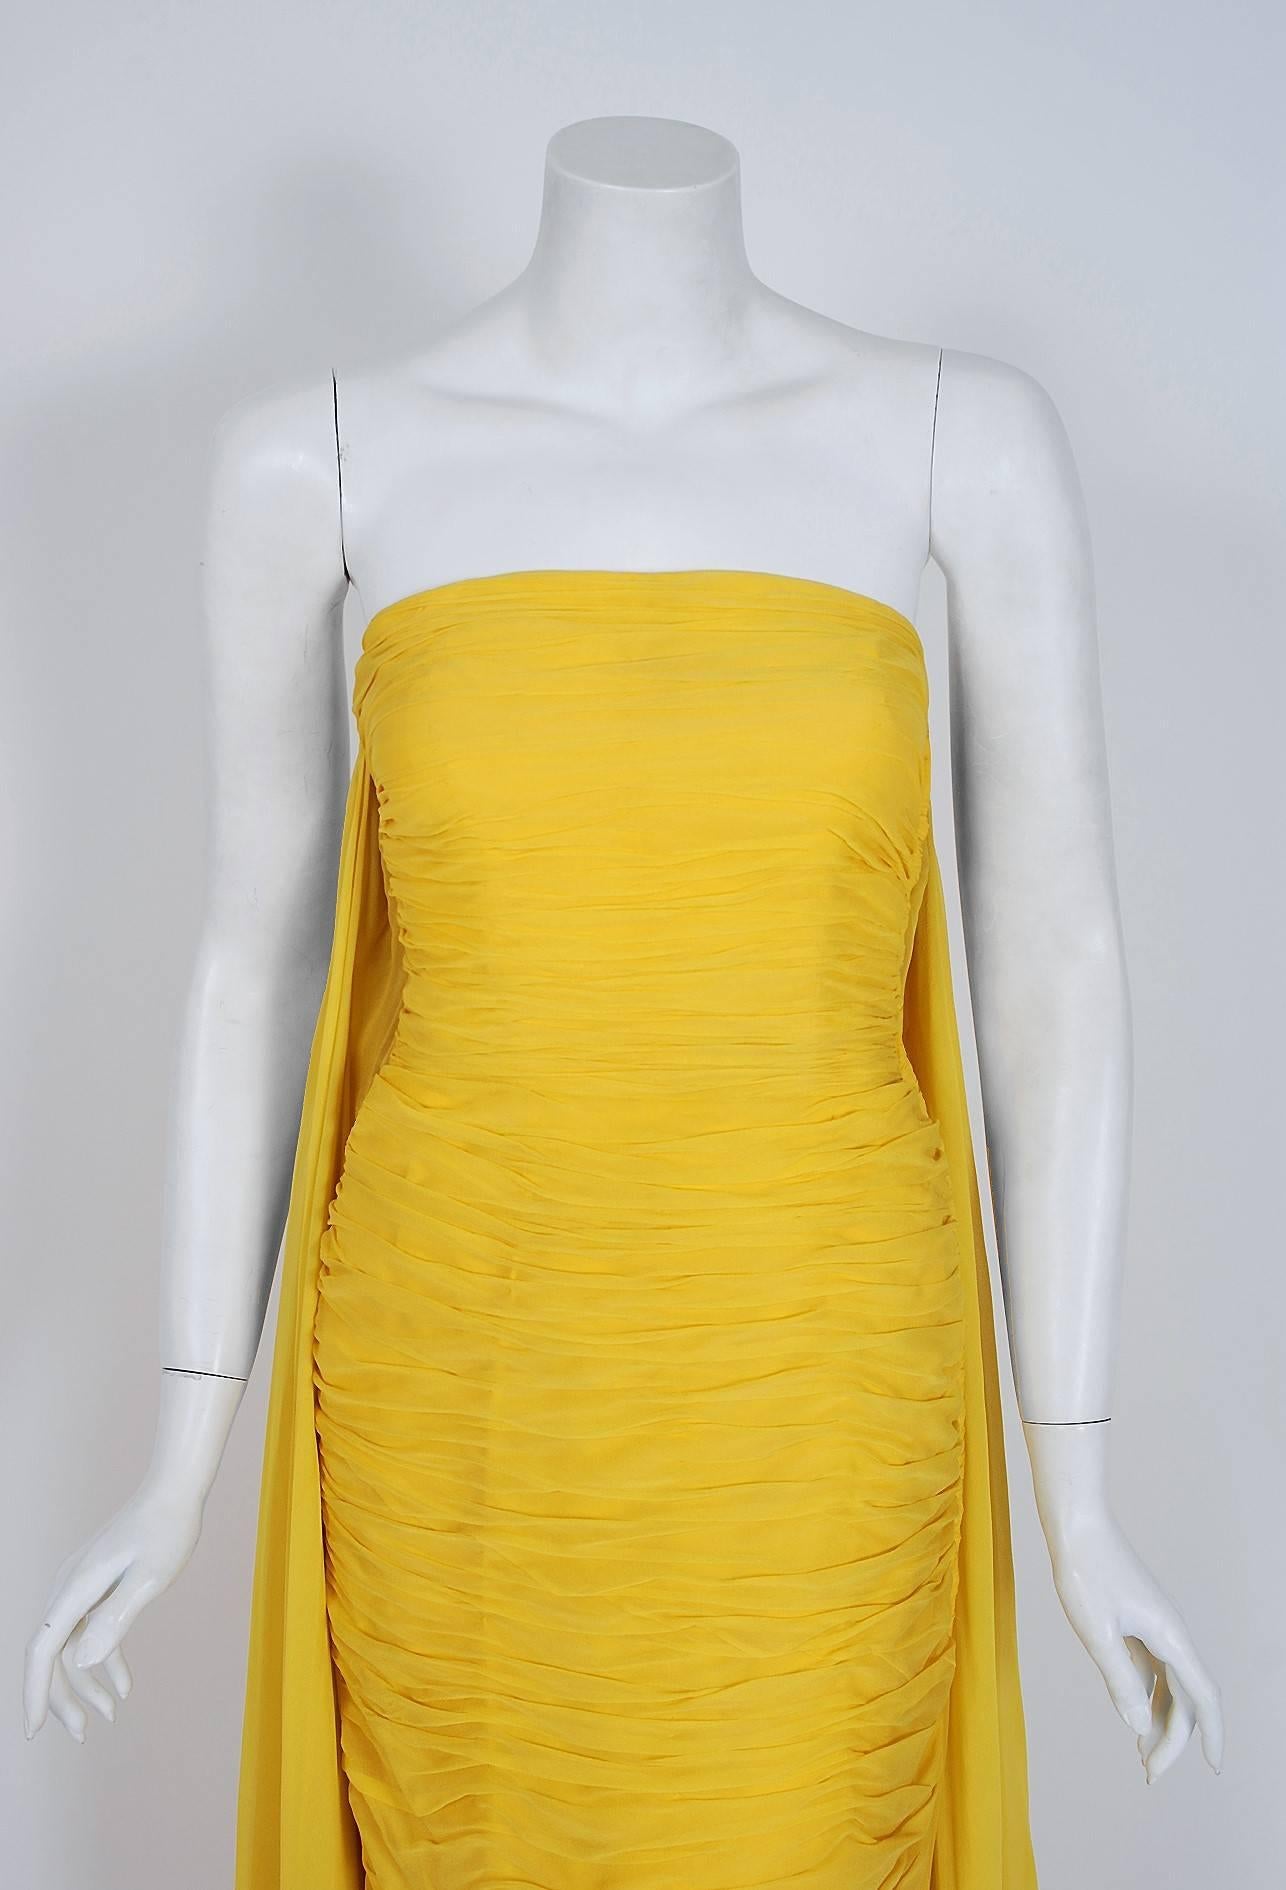 Breathtaking late 1950's Luis Estévez vibrant yellow ruched goddess gown in a rich silk-chiffon. Starting out at Patou in Paris, Estévez went on to design under his own name to great acclaim in 1955. He was considered one of the brilliant young